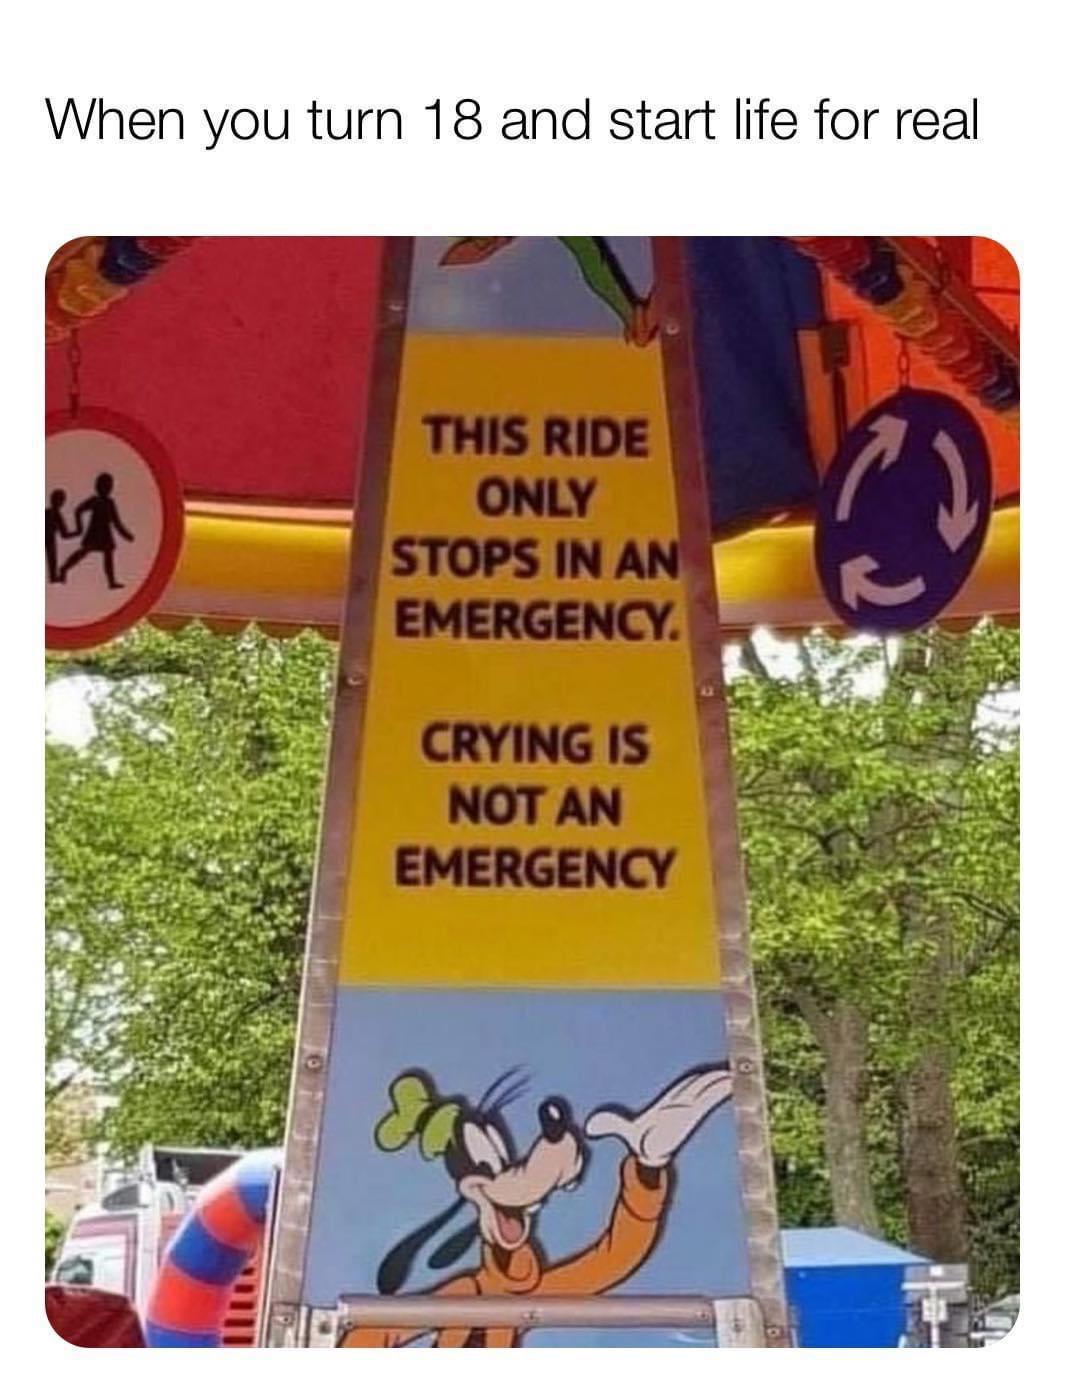 blursed signs - When you turn 18 and start life for real This Ride Only Stops In An Emergency 2 Crying Is Not An Emergency